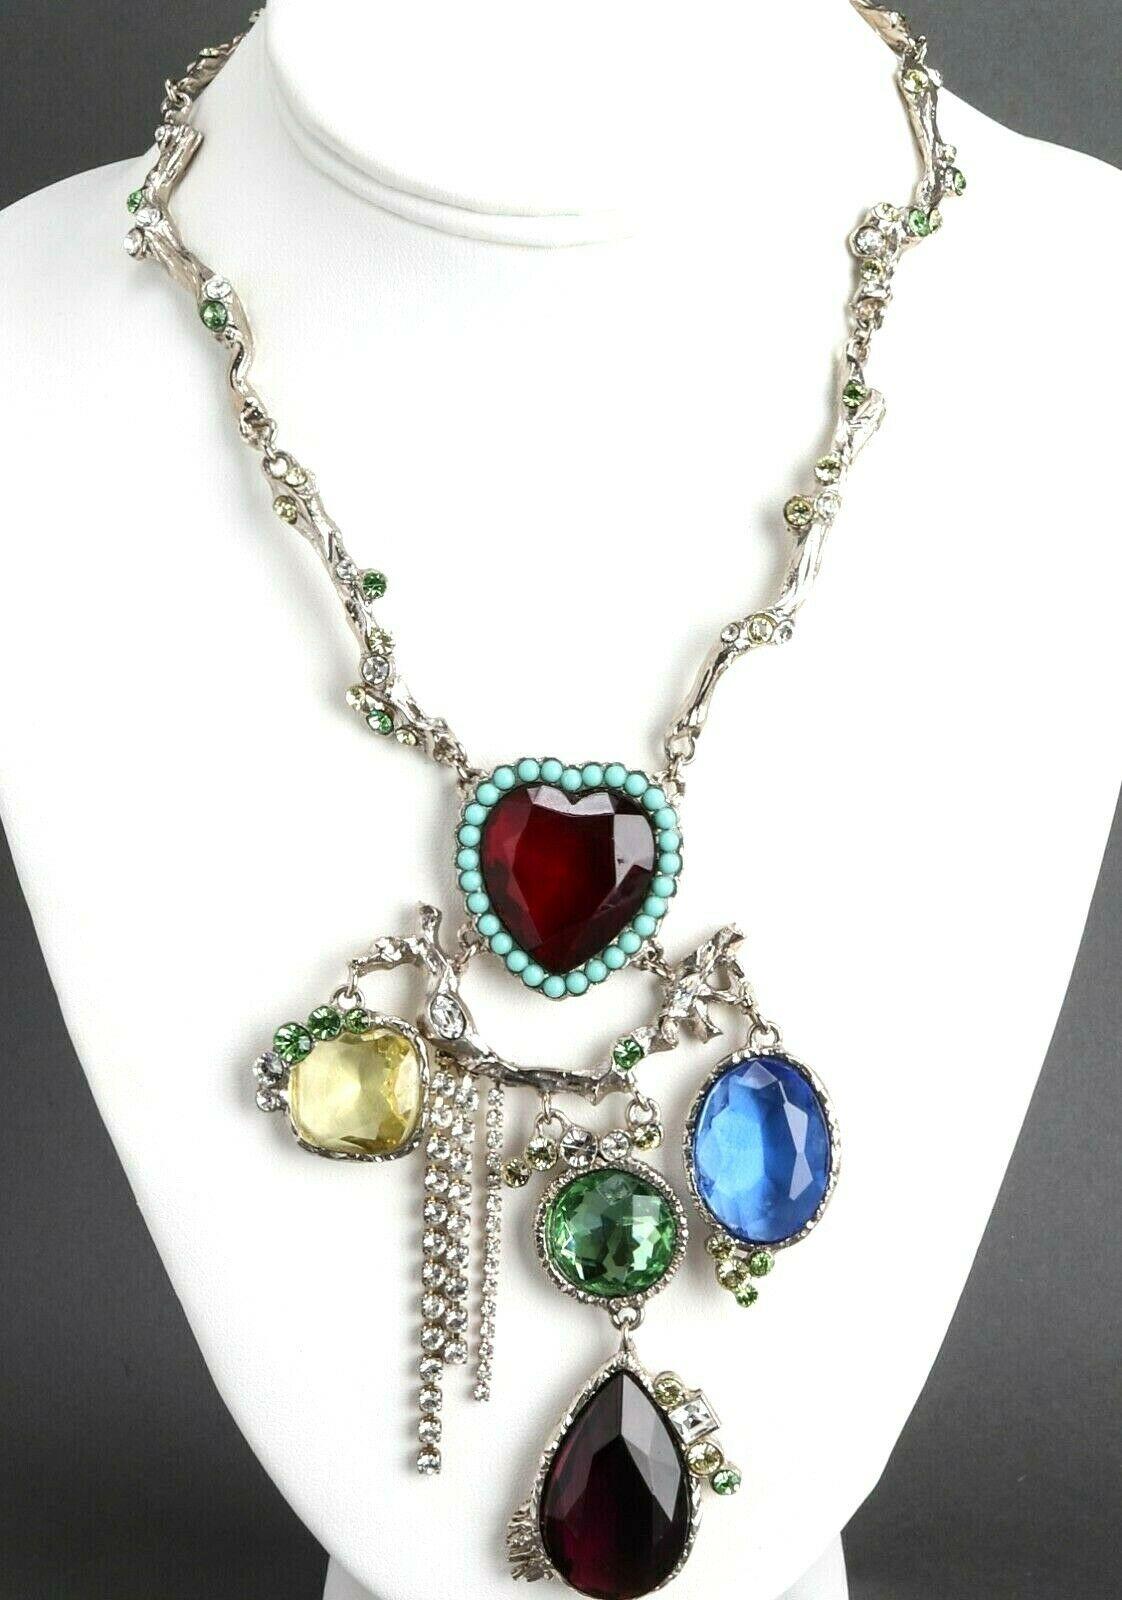 Simply Fabulous! Christian Lacroix Jeweled Multi Charm Necklace. Branch motif Pendant Necklace featuring five large faceted faux Gemstones including one faux Amethyst Heart. Silver-tone mounting. Necklace measures approx. 17.5